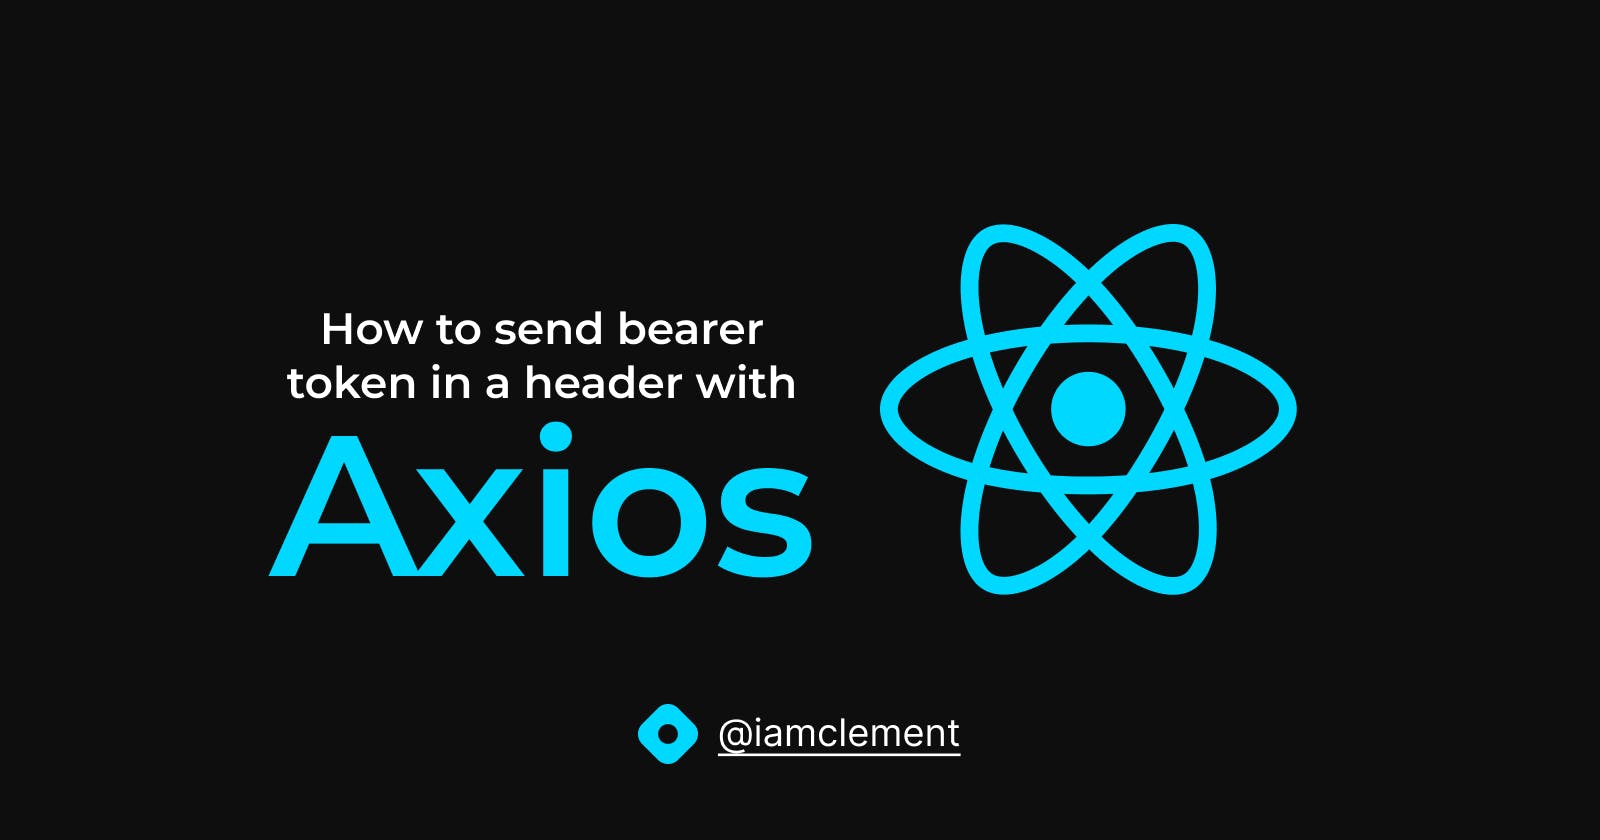 How to send bearer token in a header with Axios